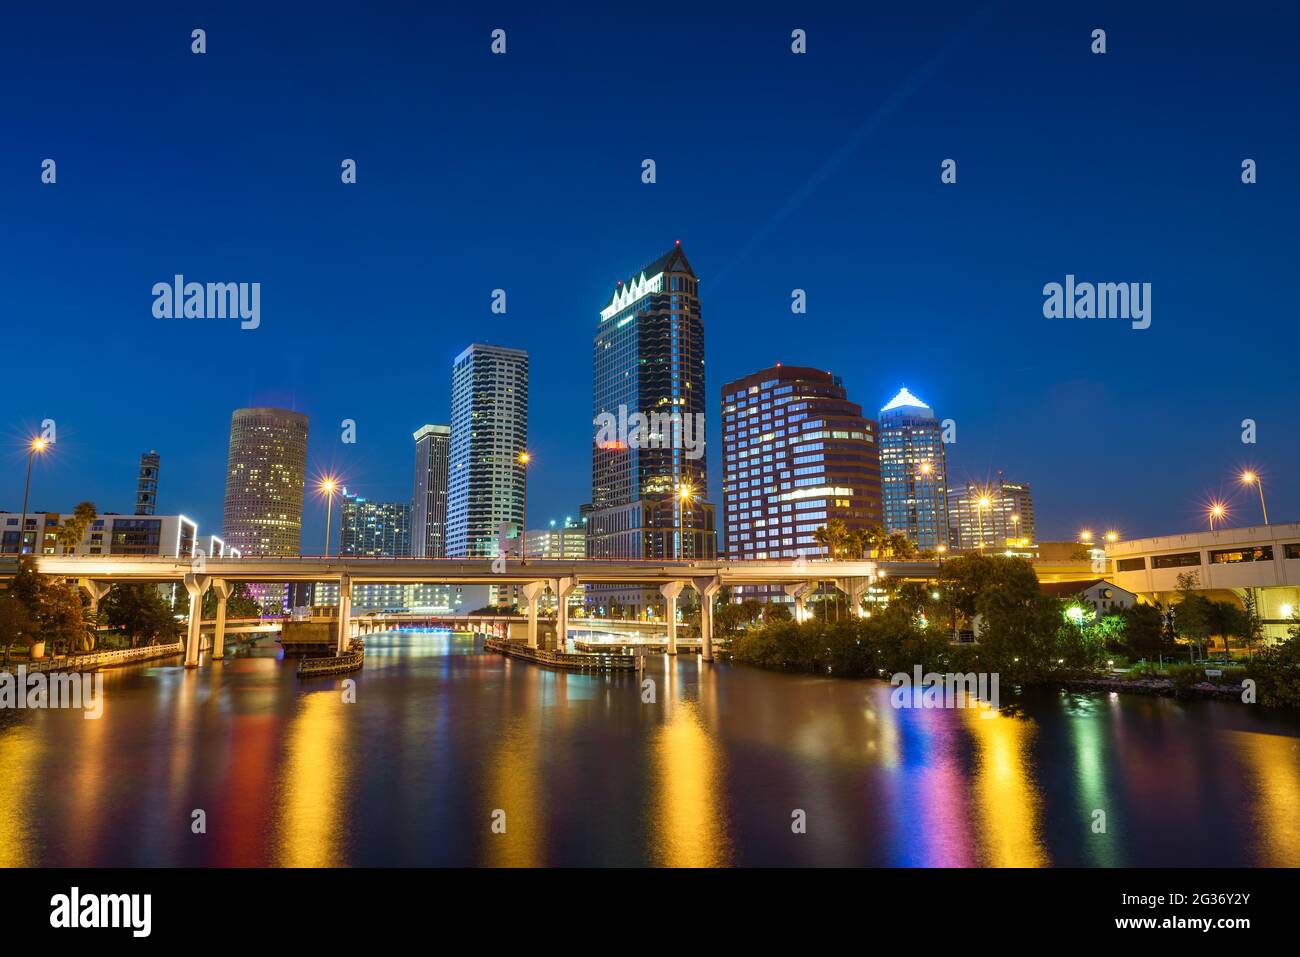 Tampa skyline at night with Hillsborough river in the foreground Stock Photo